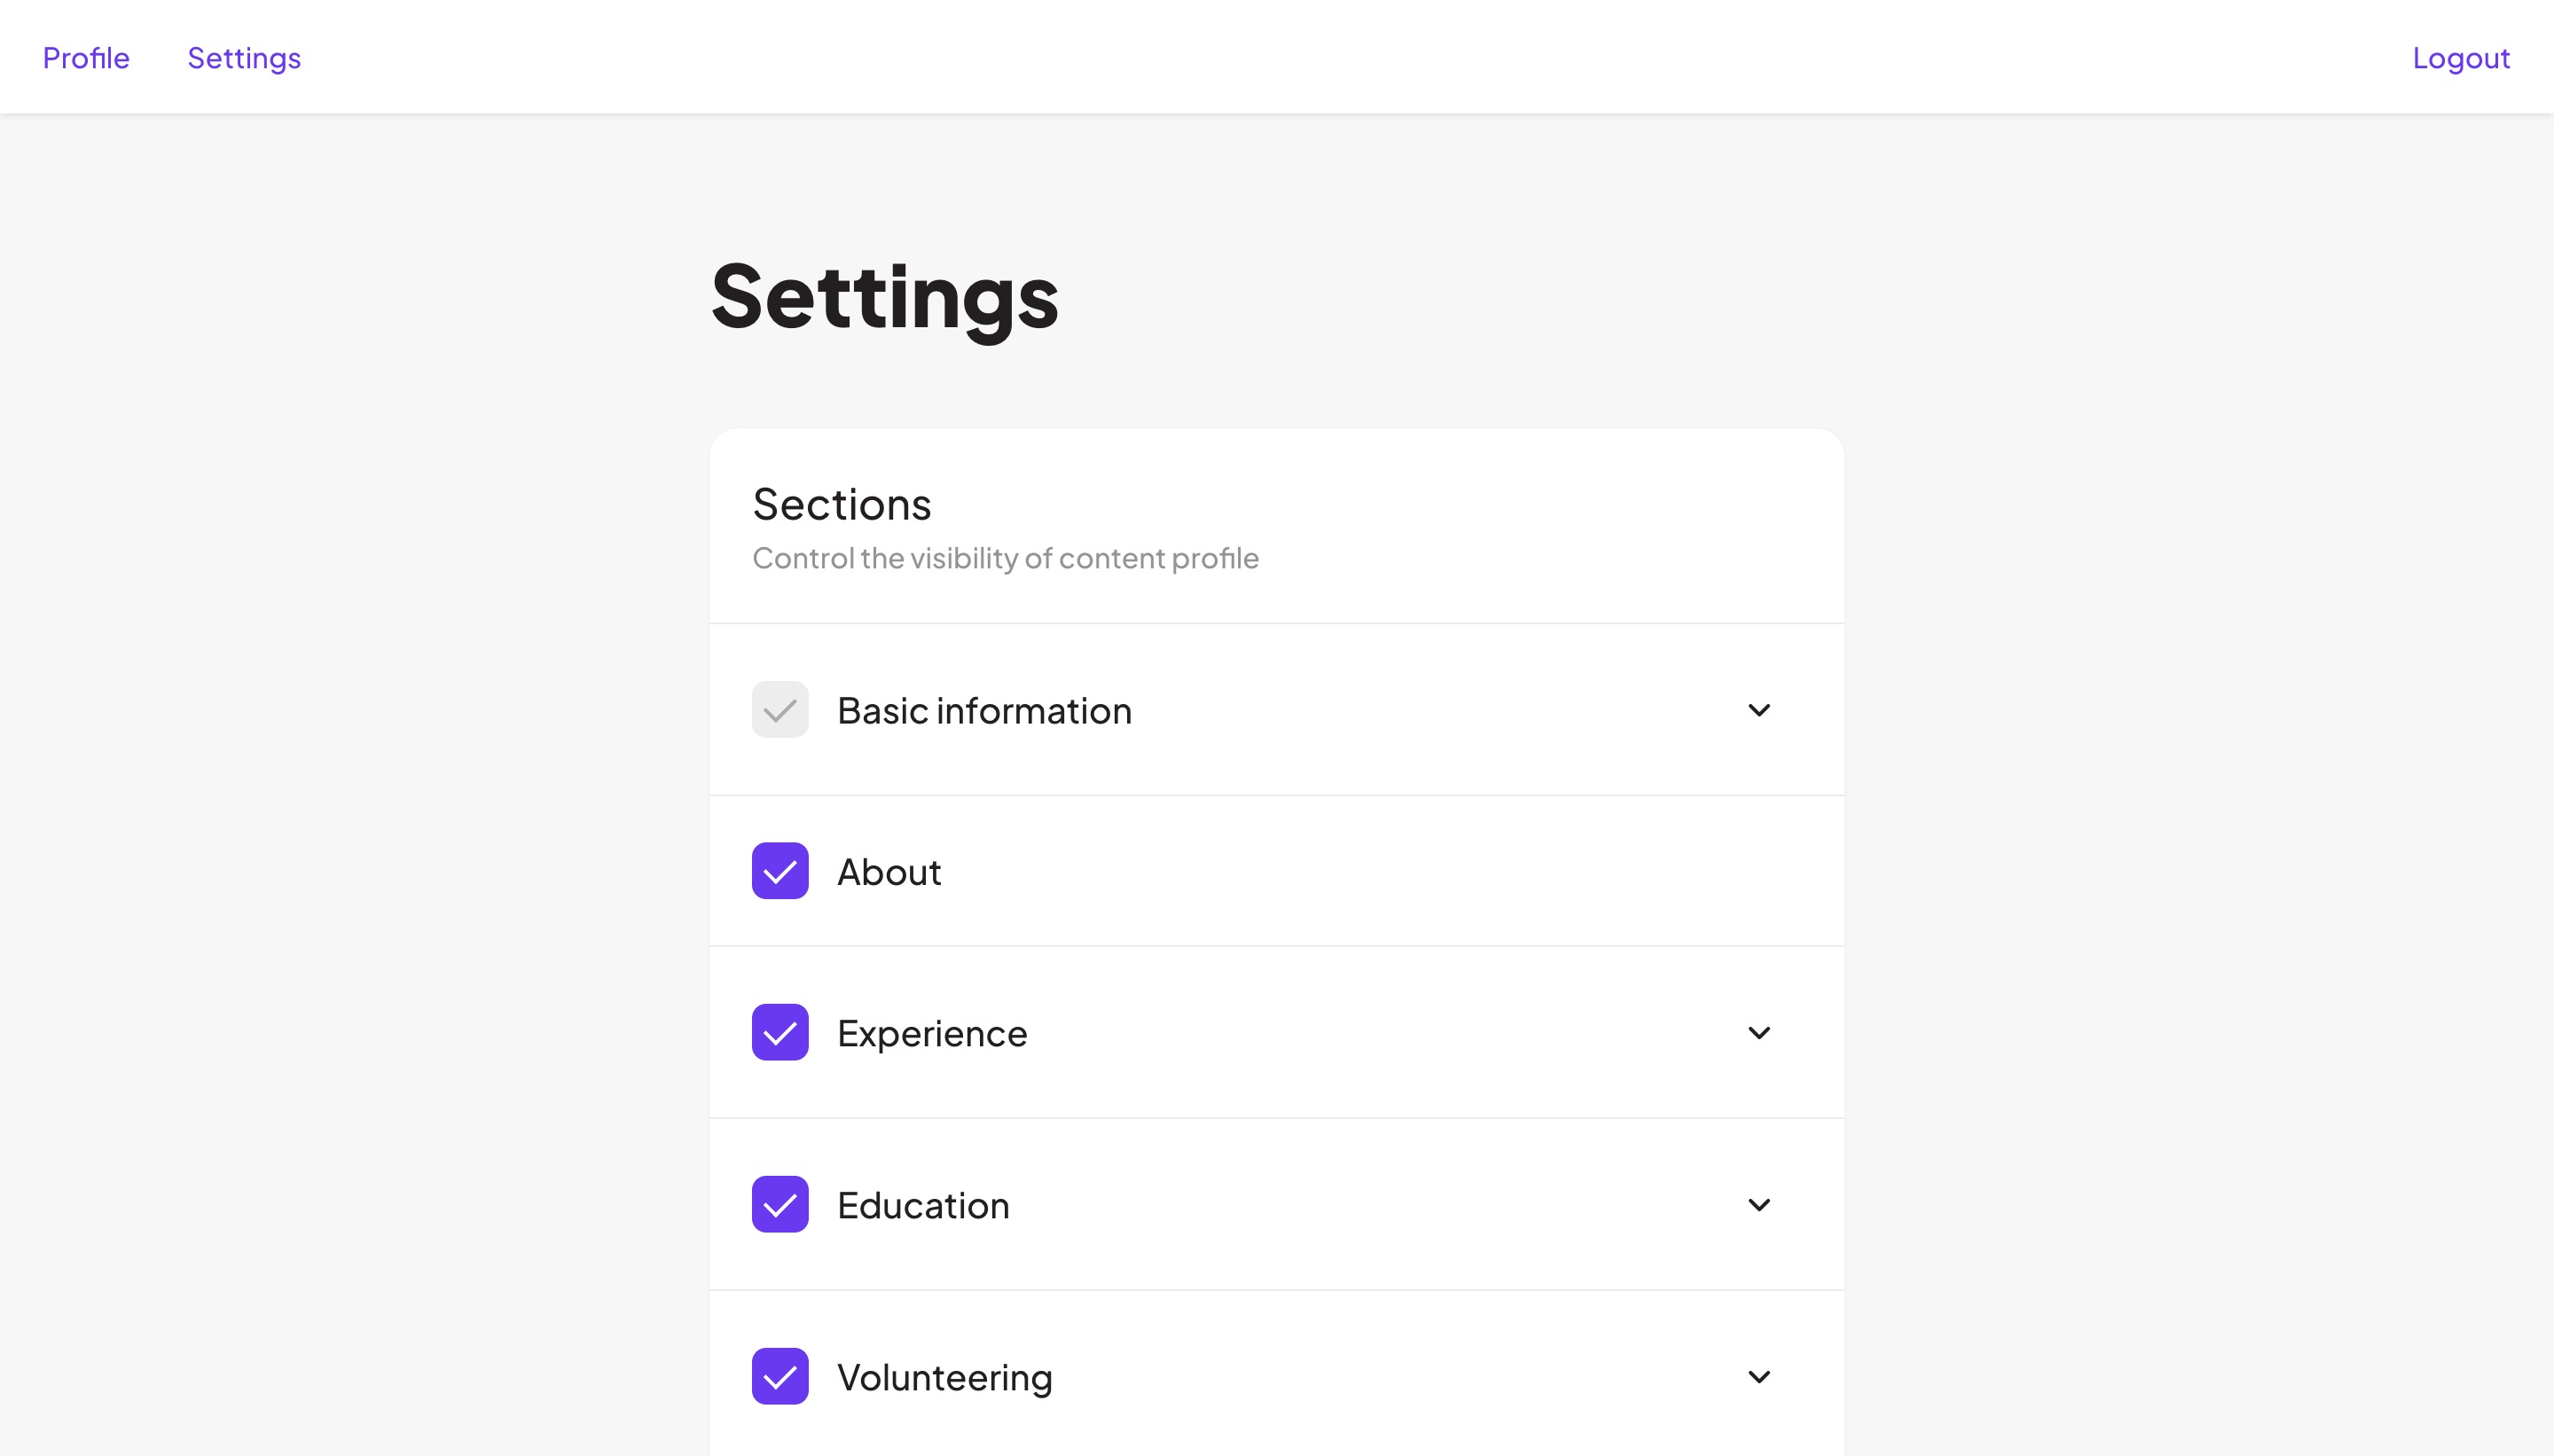 Access the settings page of your profile